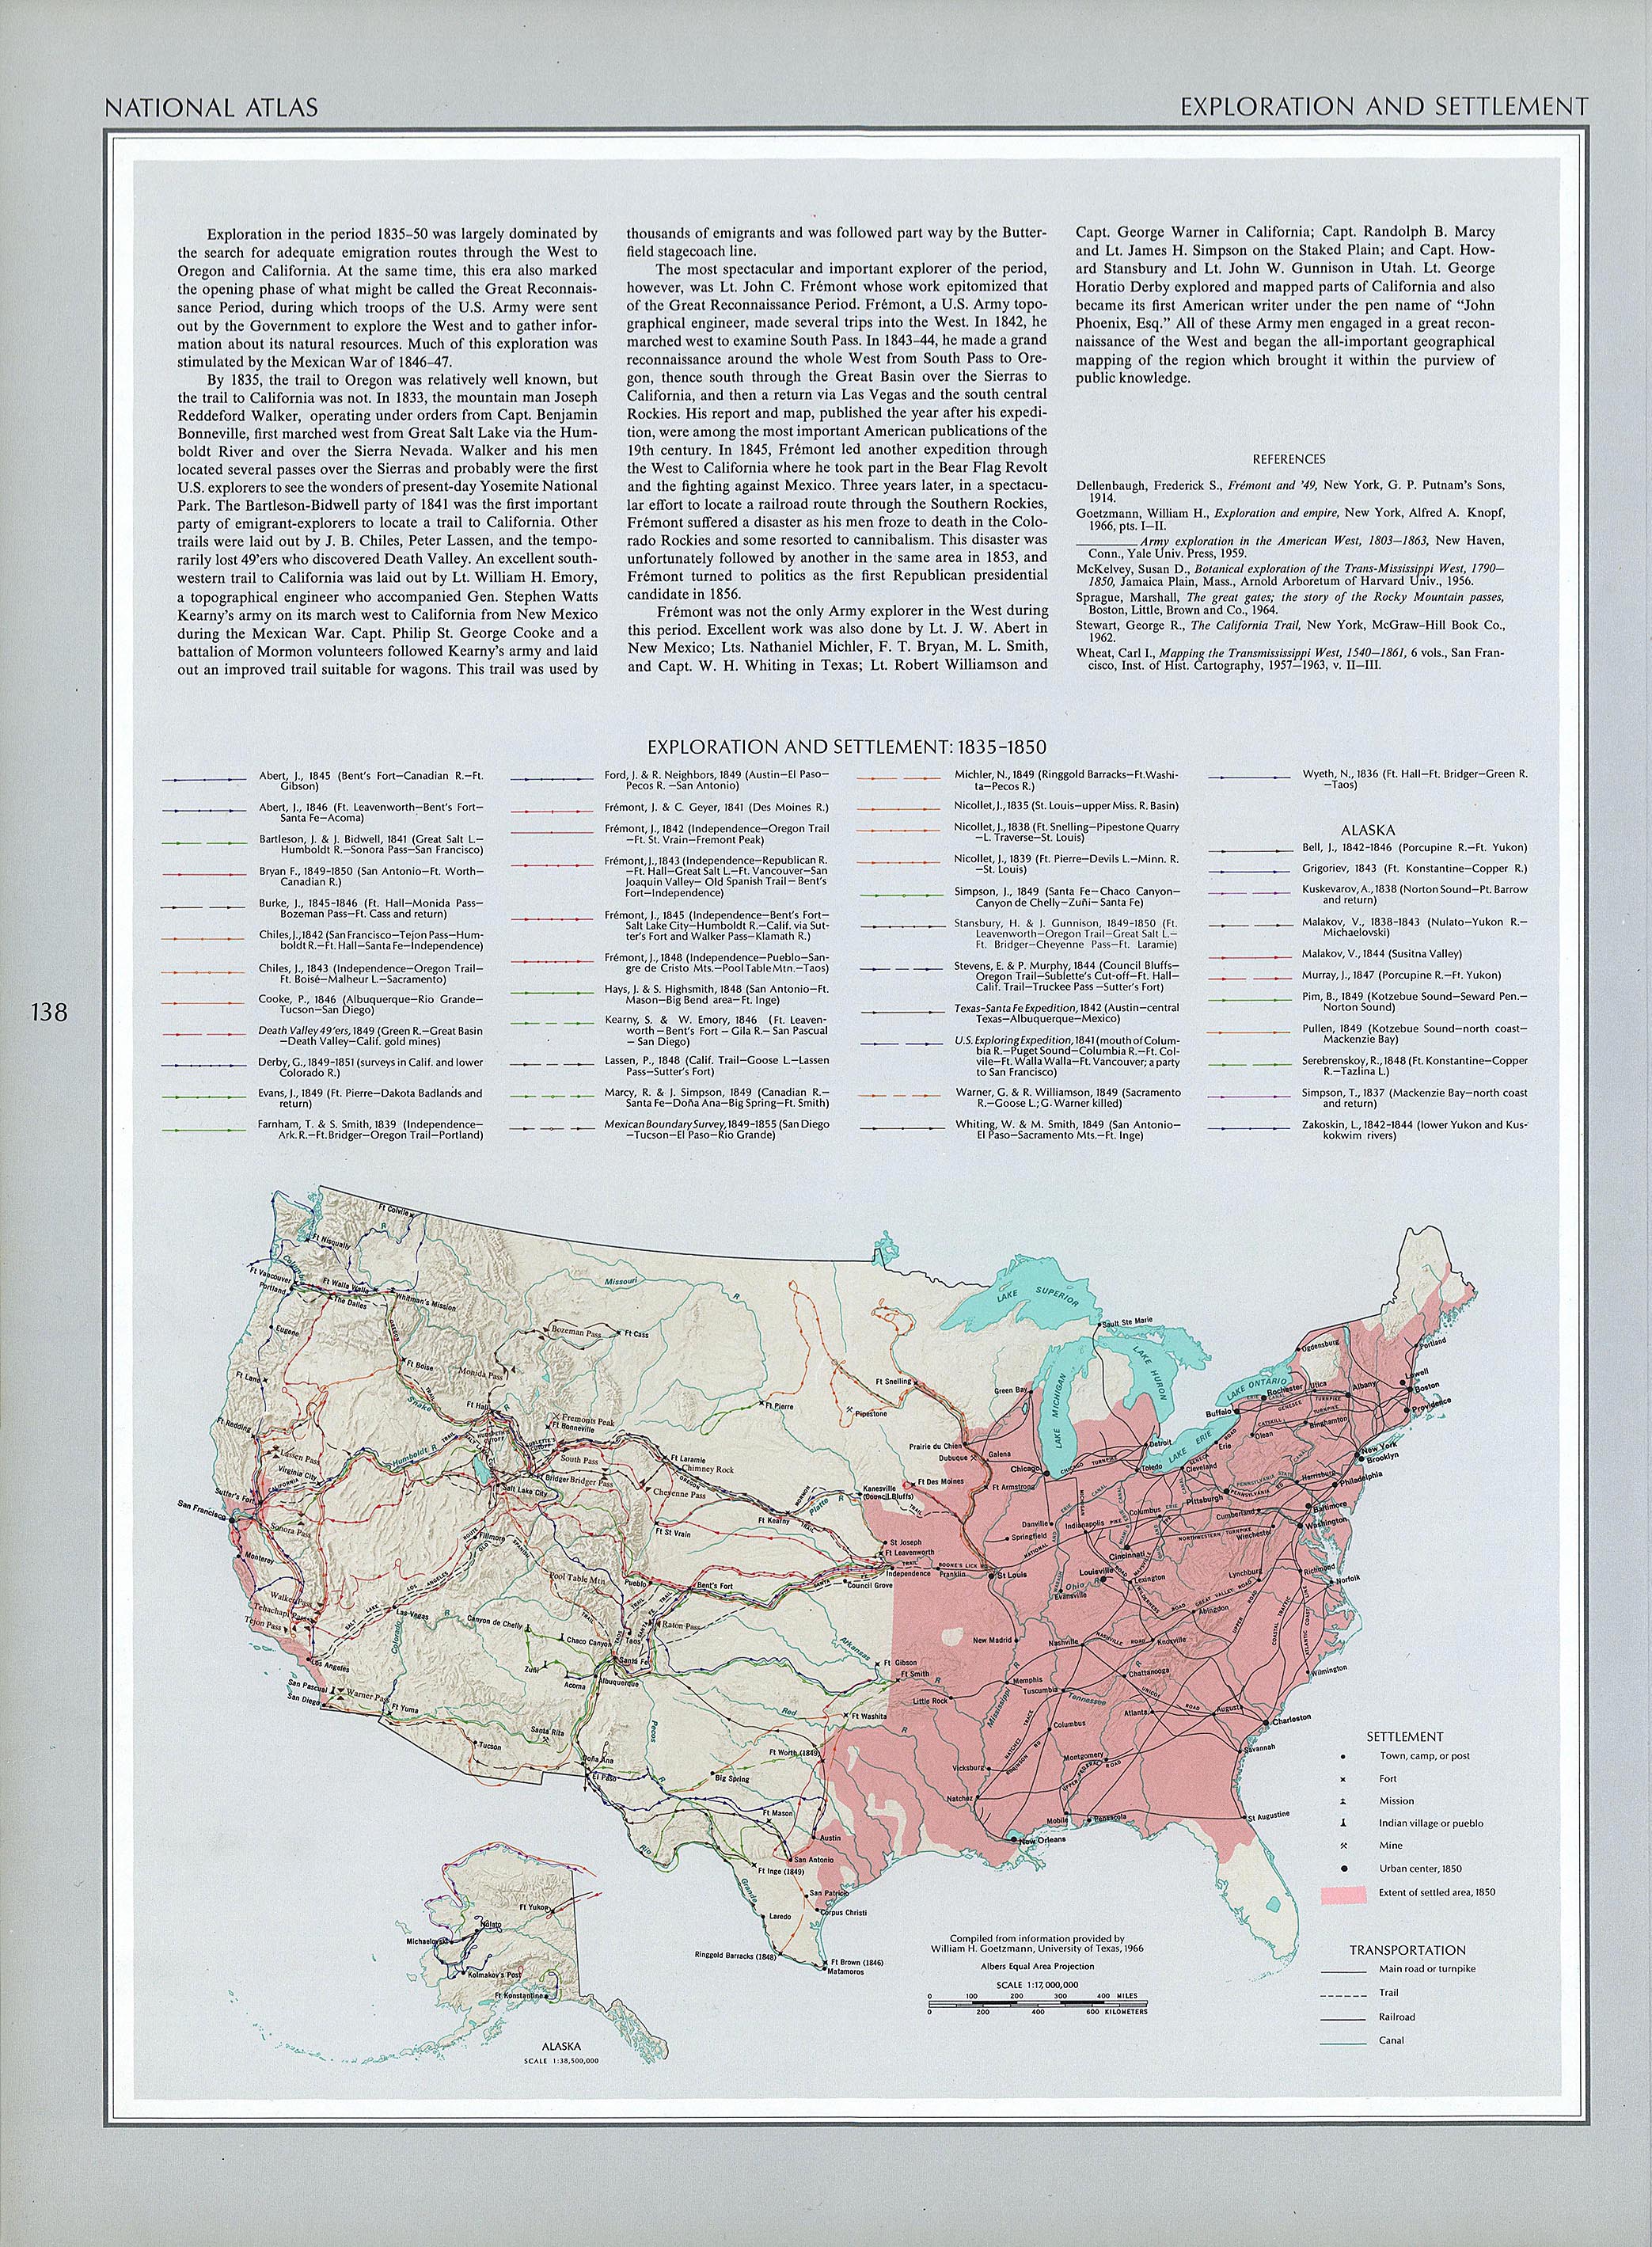 Historical Maps of United States. Exploration and Settlement 1835-1850 (833K) 